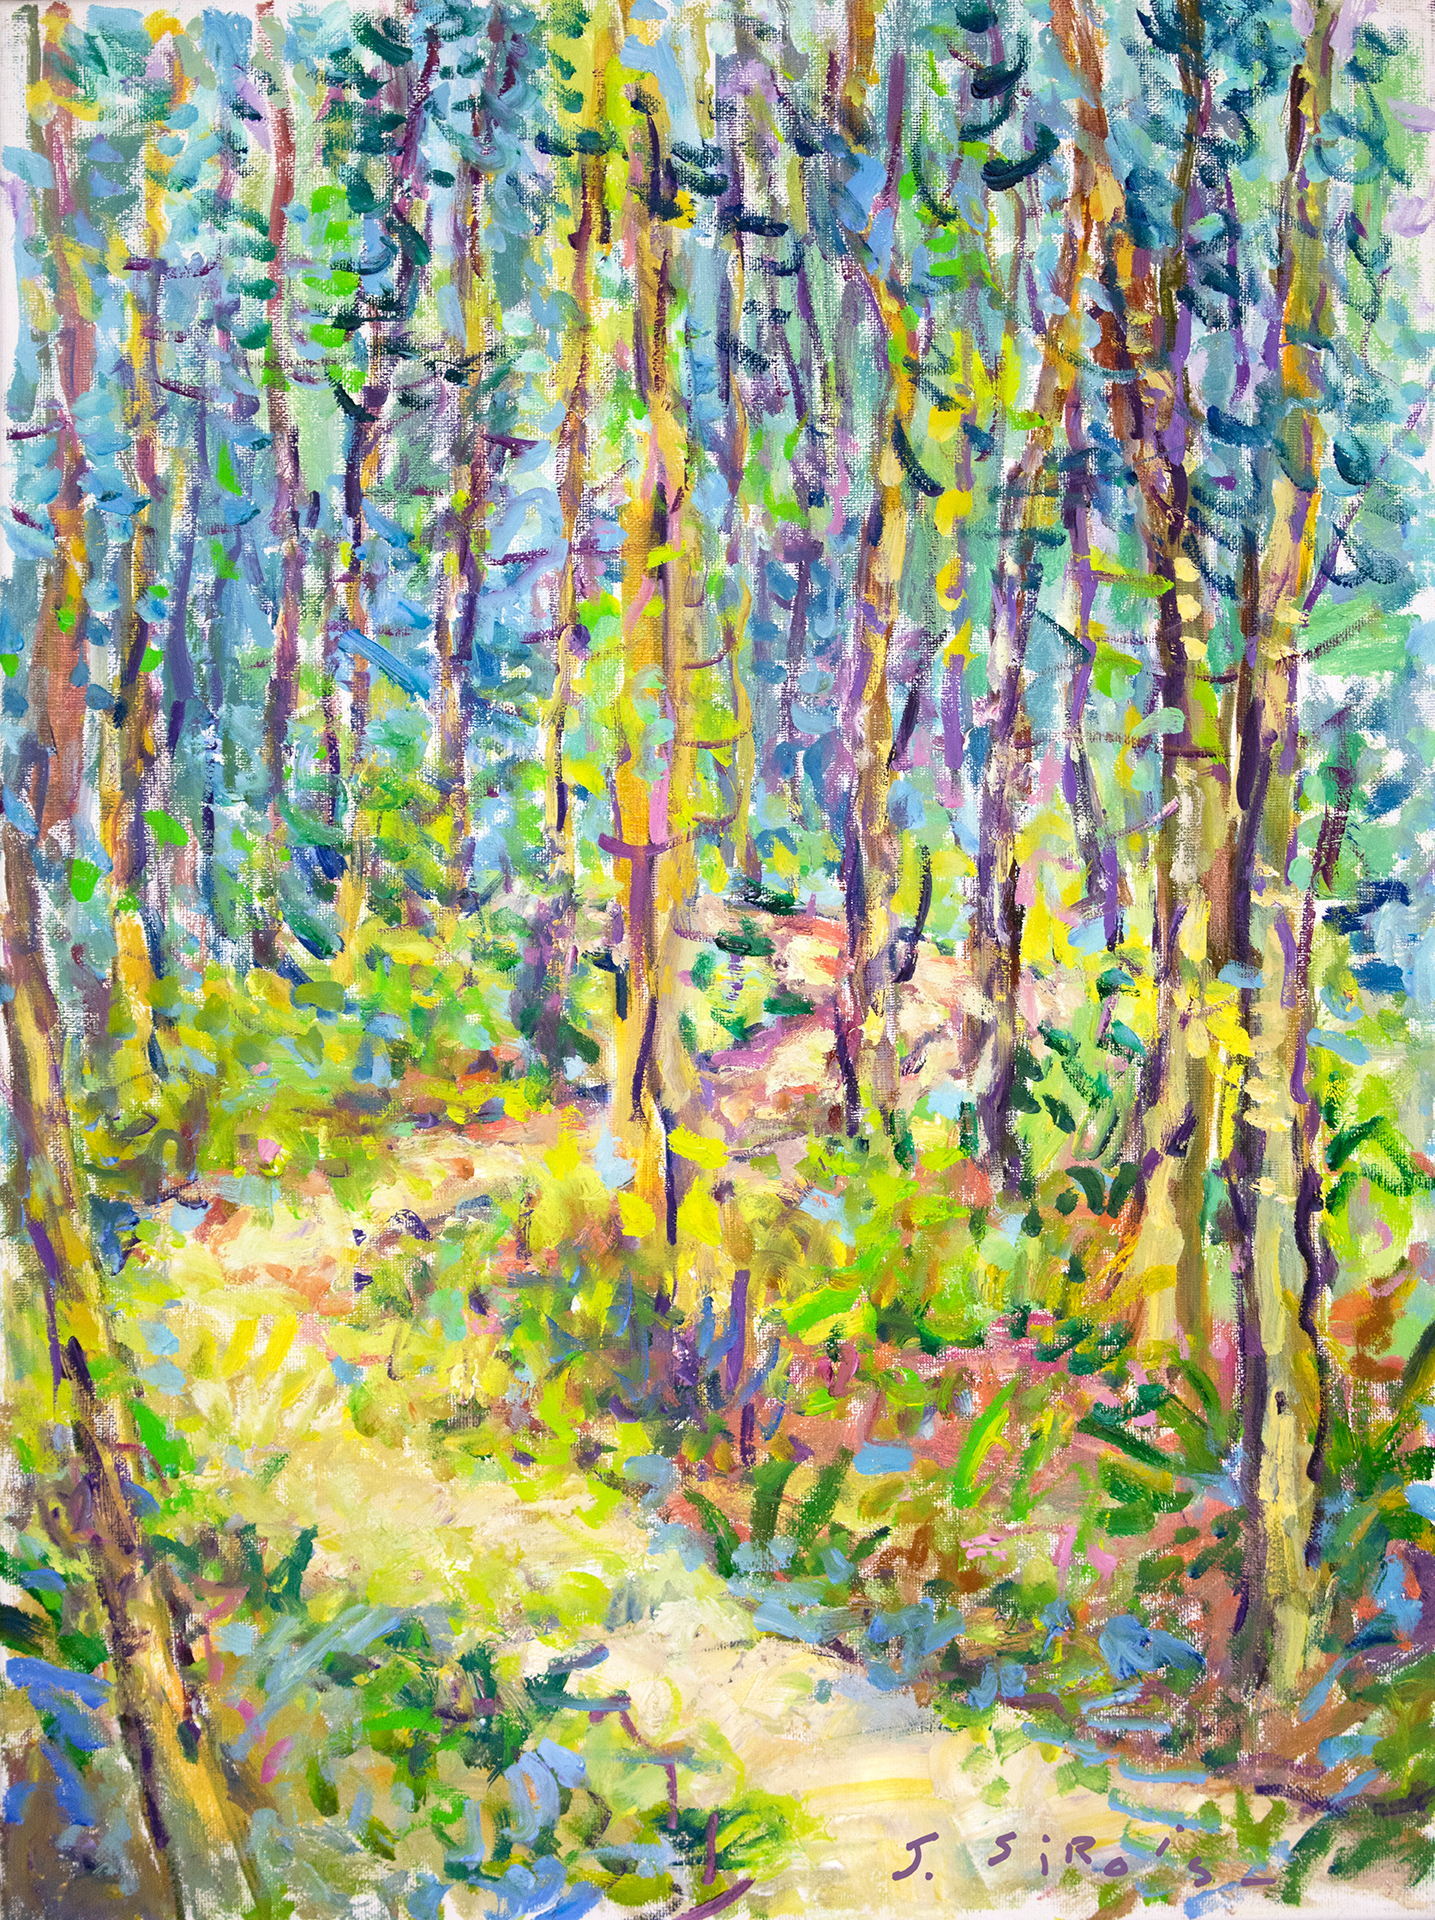 Img 0865 forest path 18x24 oil sm 72ppi ey9xt7